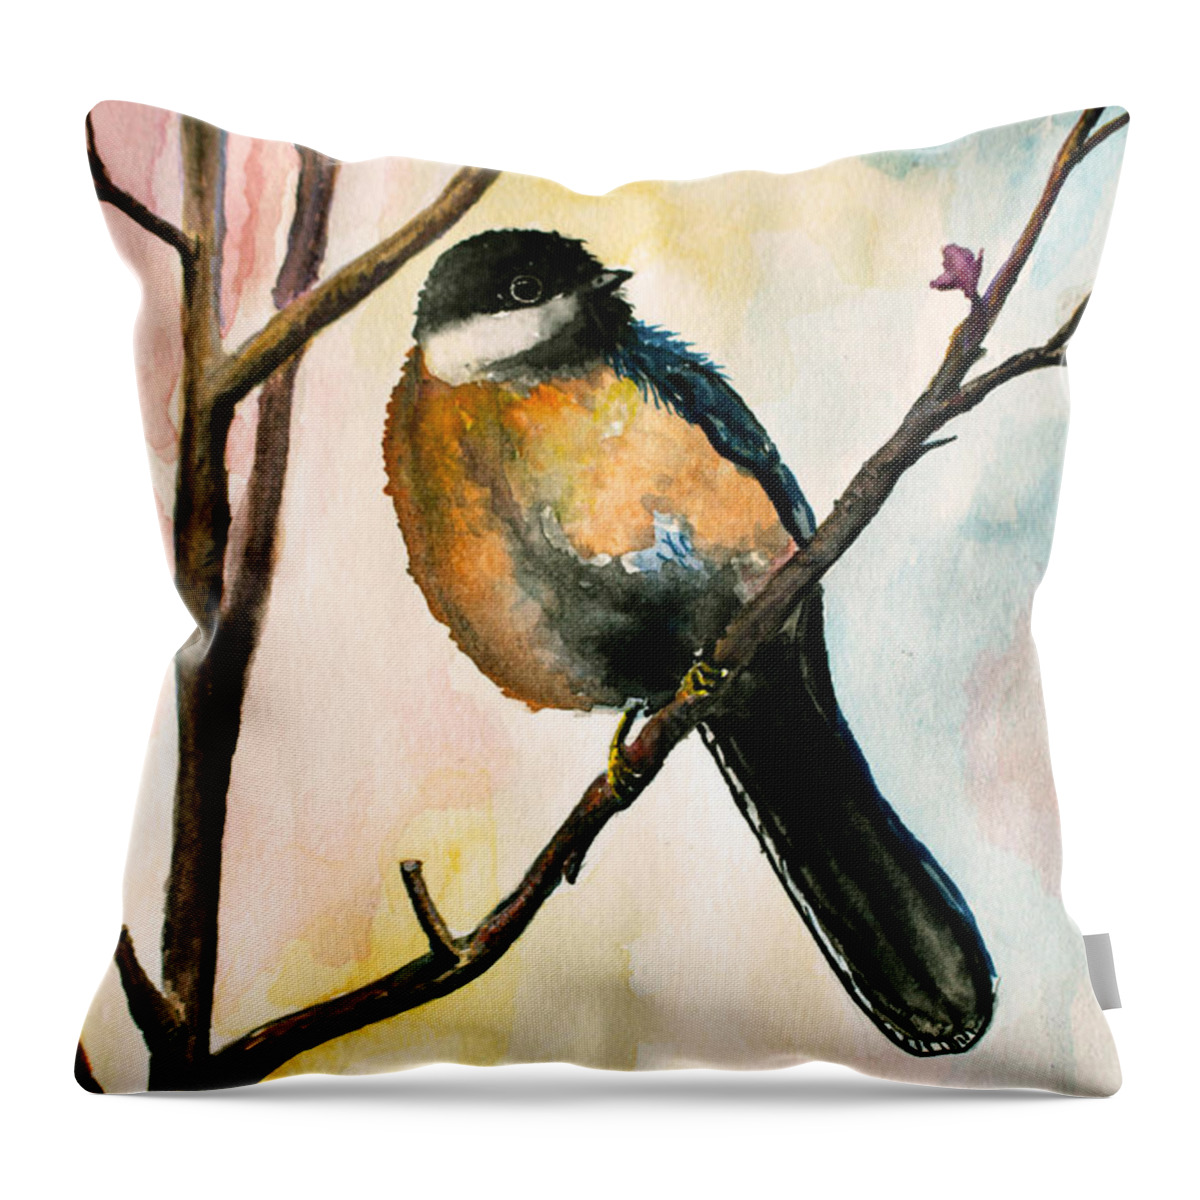 Watercolor Throw Pillow featuring the painting Little Bird 8 by Medea Ioseliani